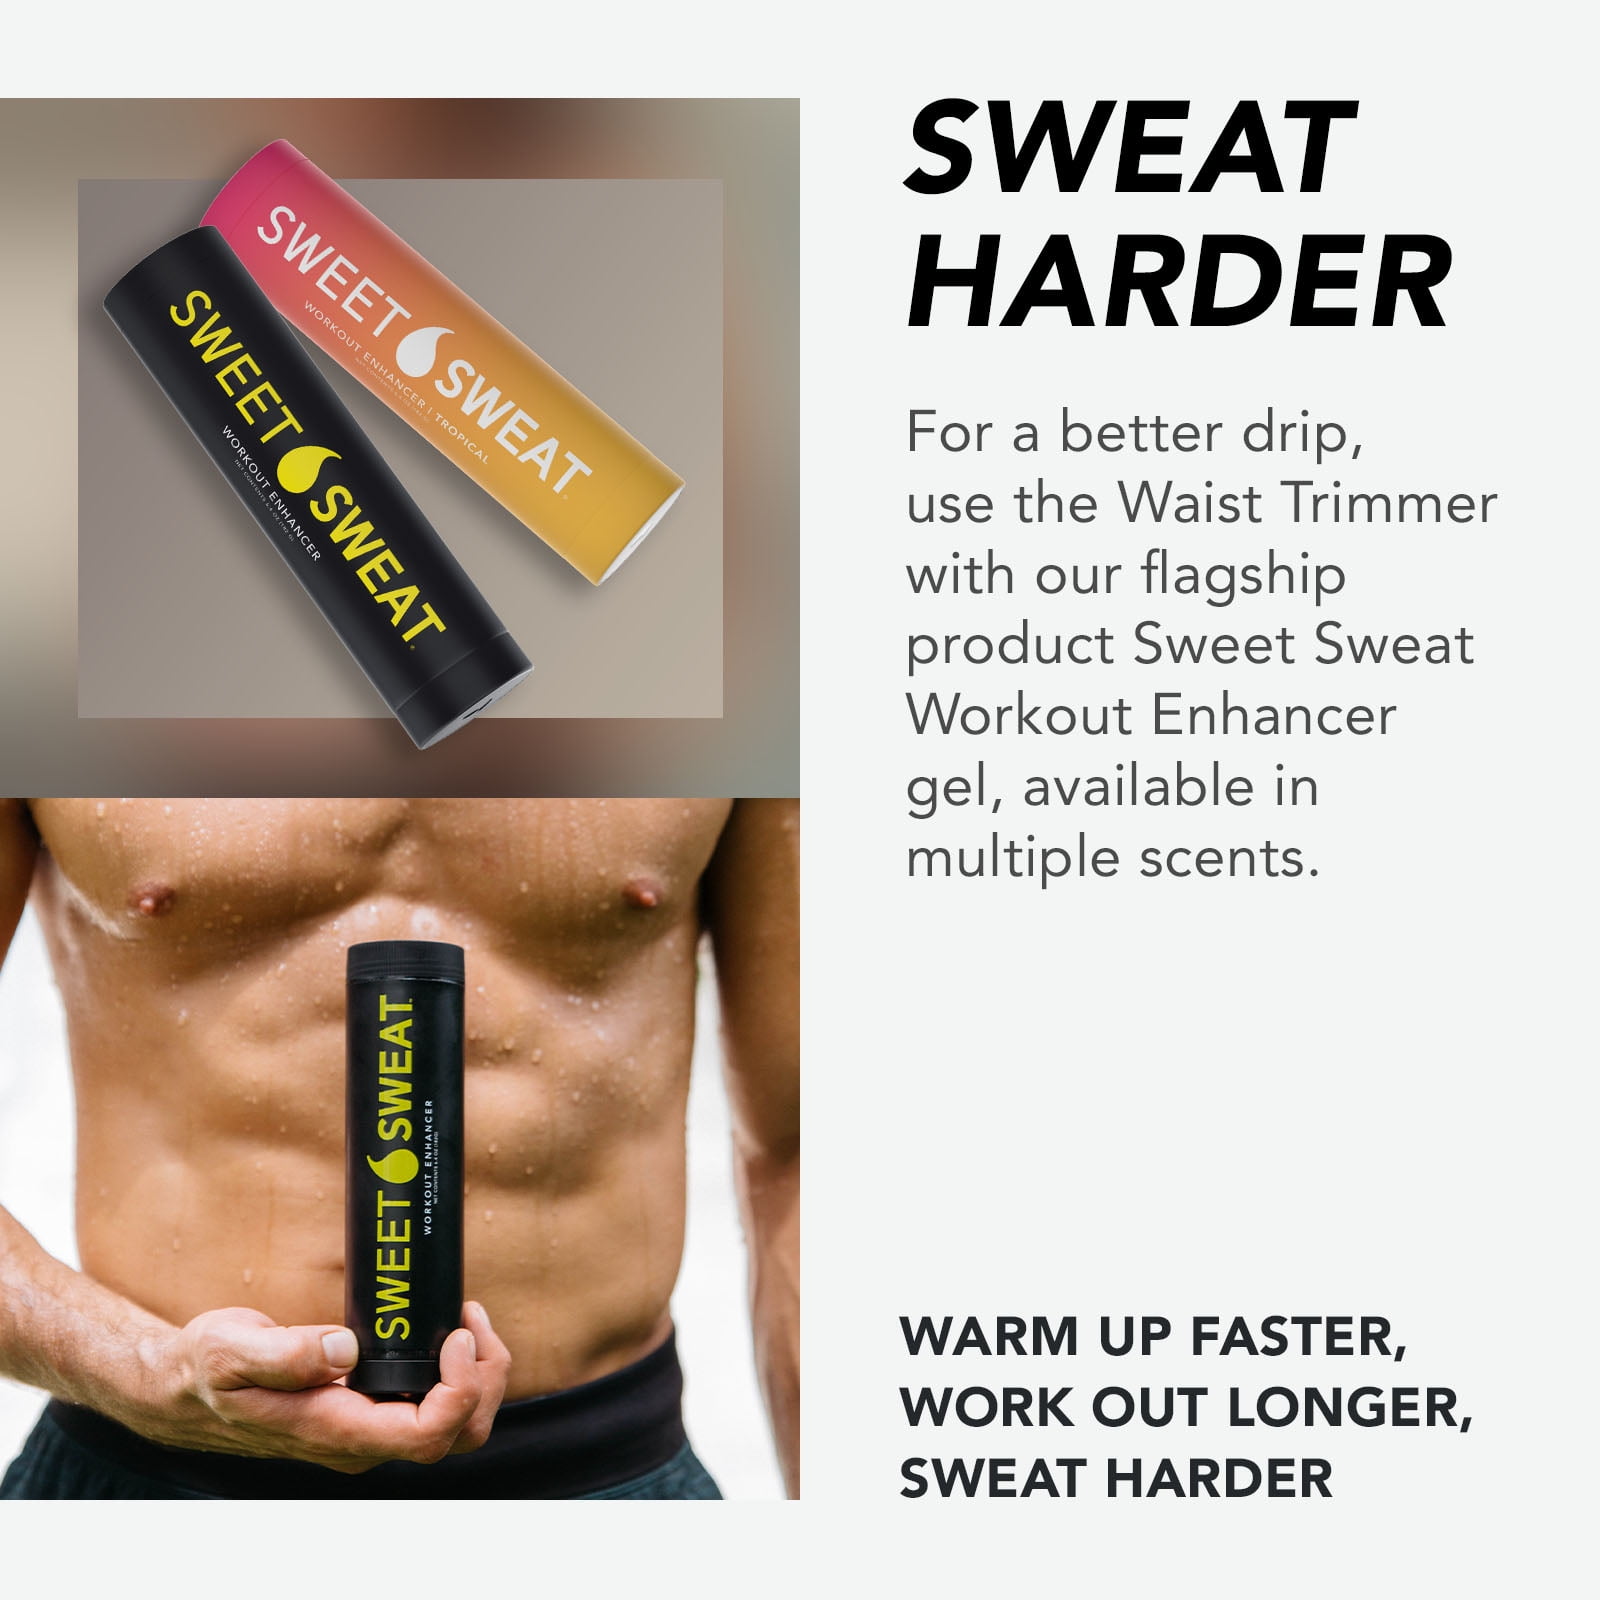  Sweet Sweat Waist Trimmer 'Xtra-Coverage' Belt  Premium Waist  Trainer with more Torso Coverage for a Better Sweat! (Small) Black : Sports  & Outdoors